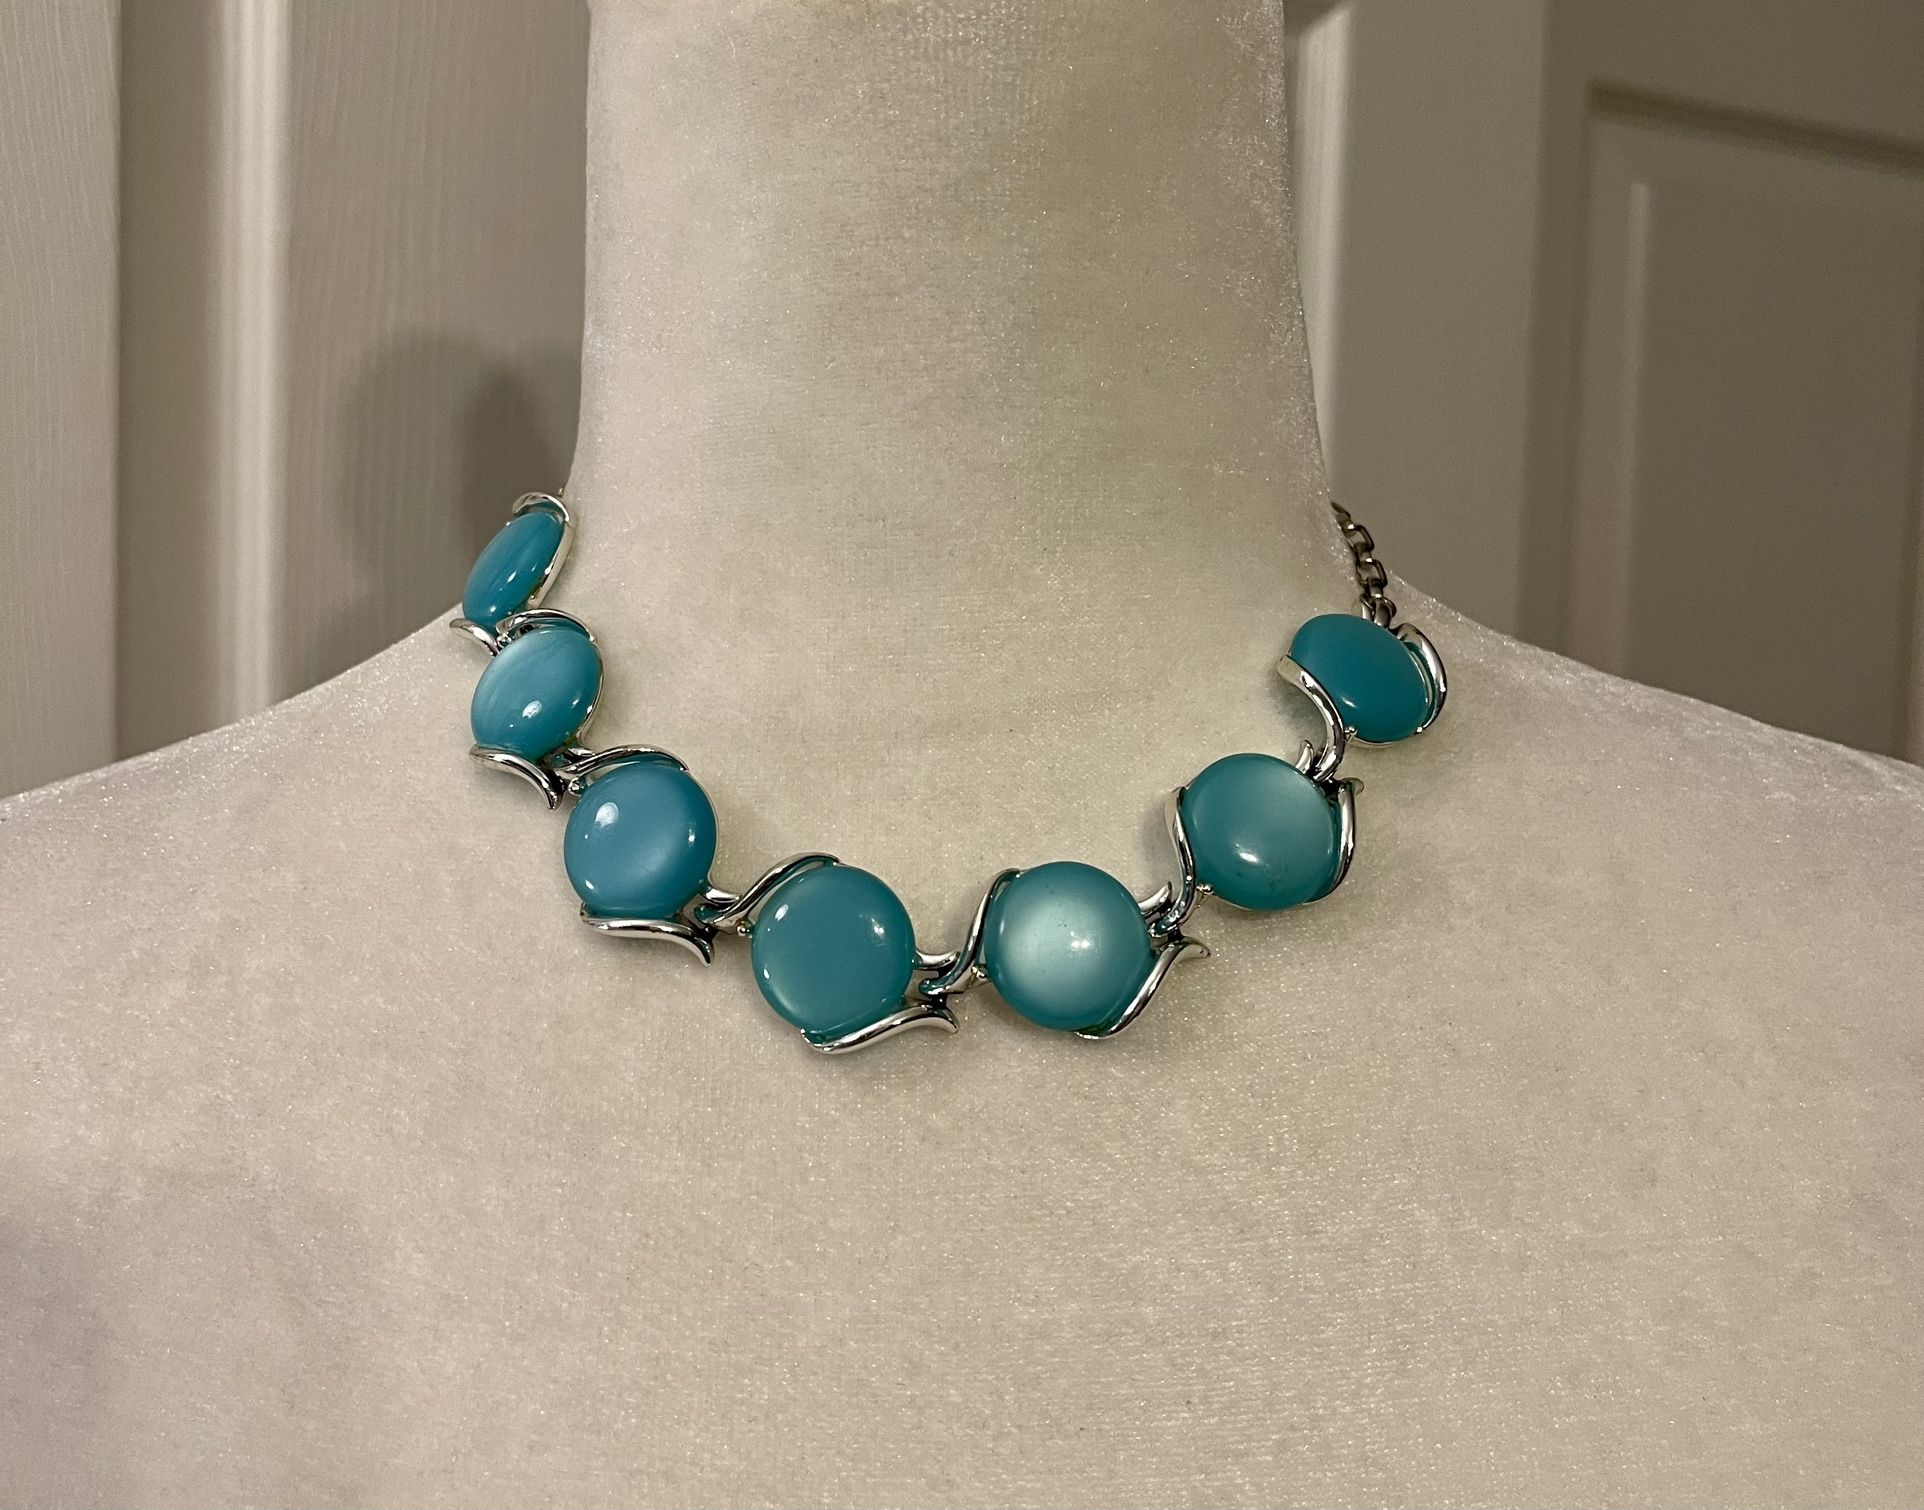 Beautiful Turquoise Colored Stone Choker Style Necklace With Gold Colored Chain And Accents. 